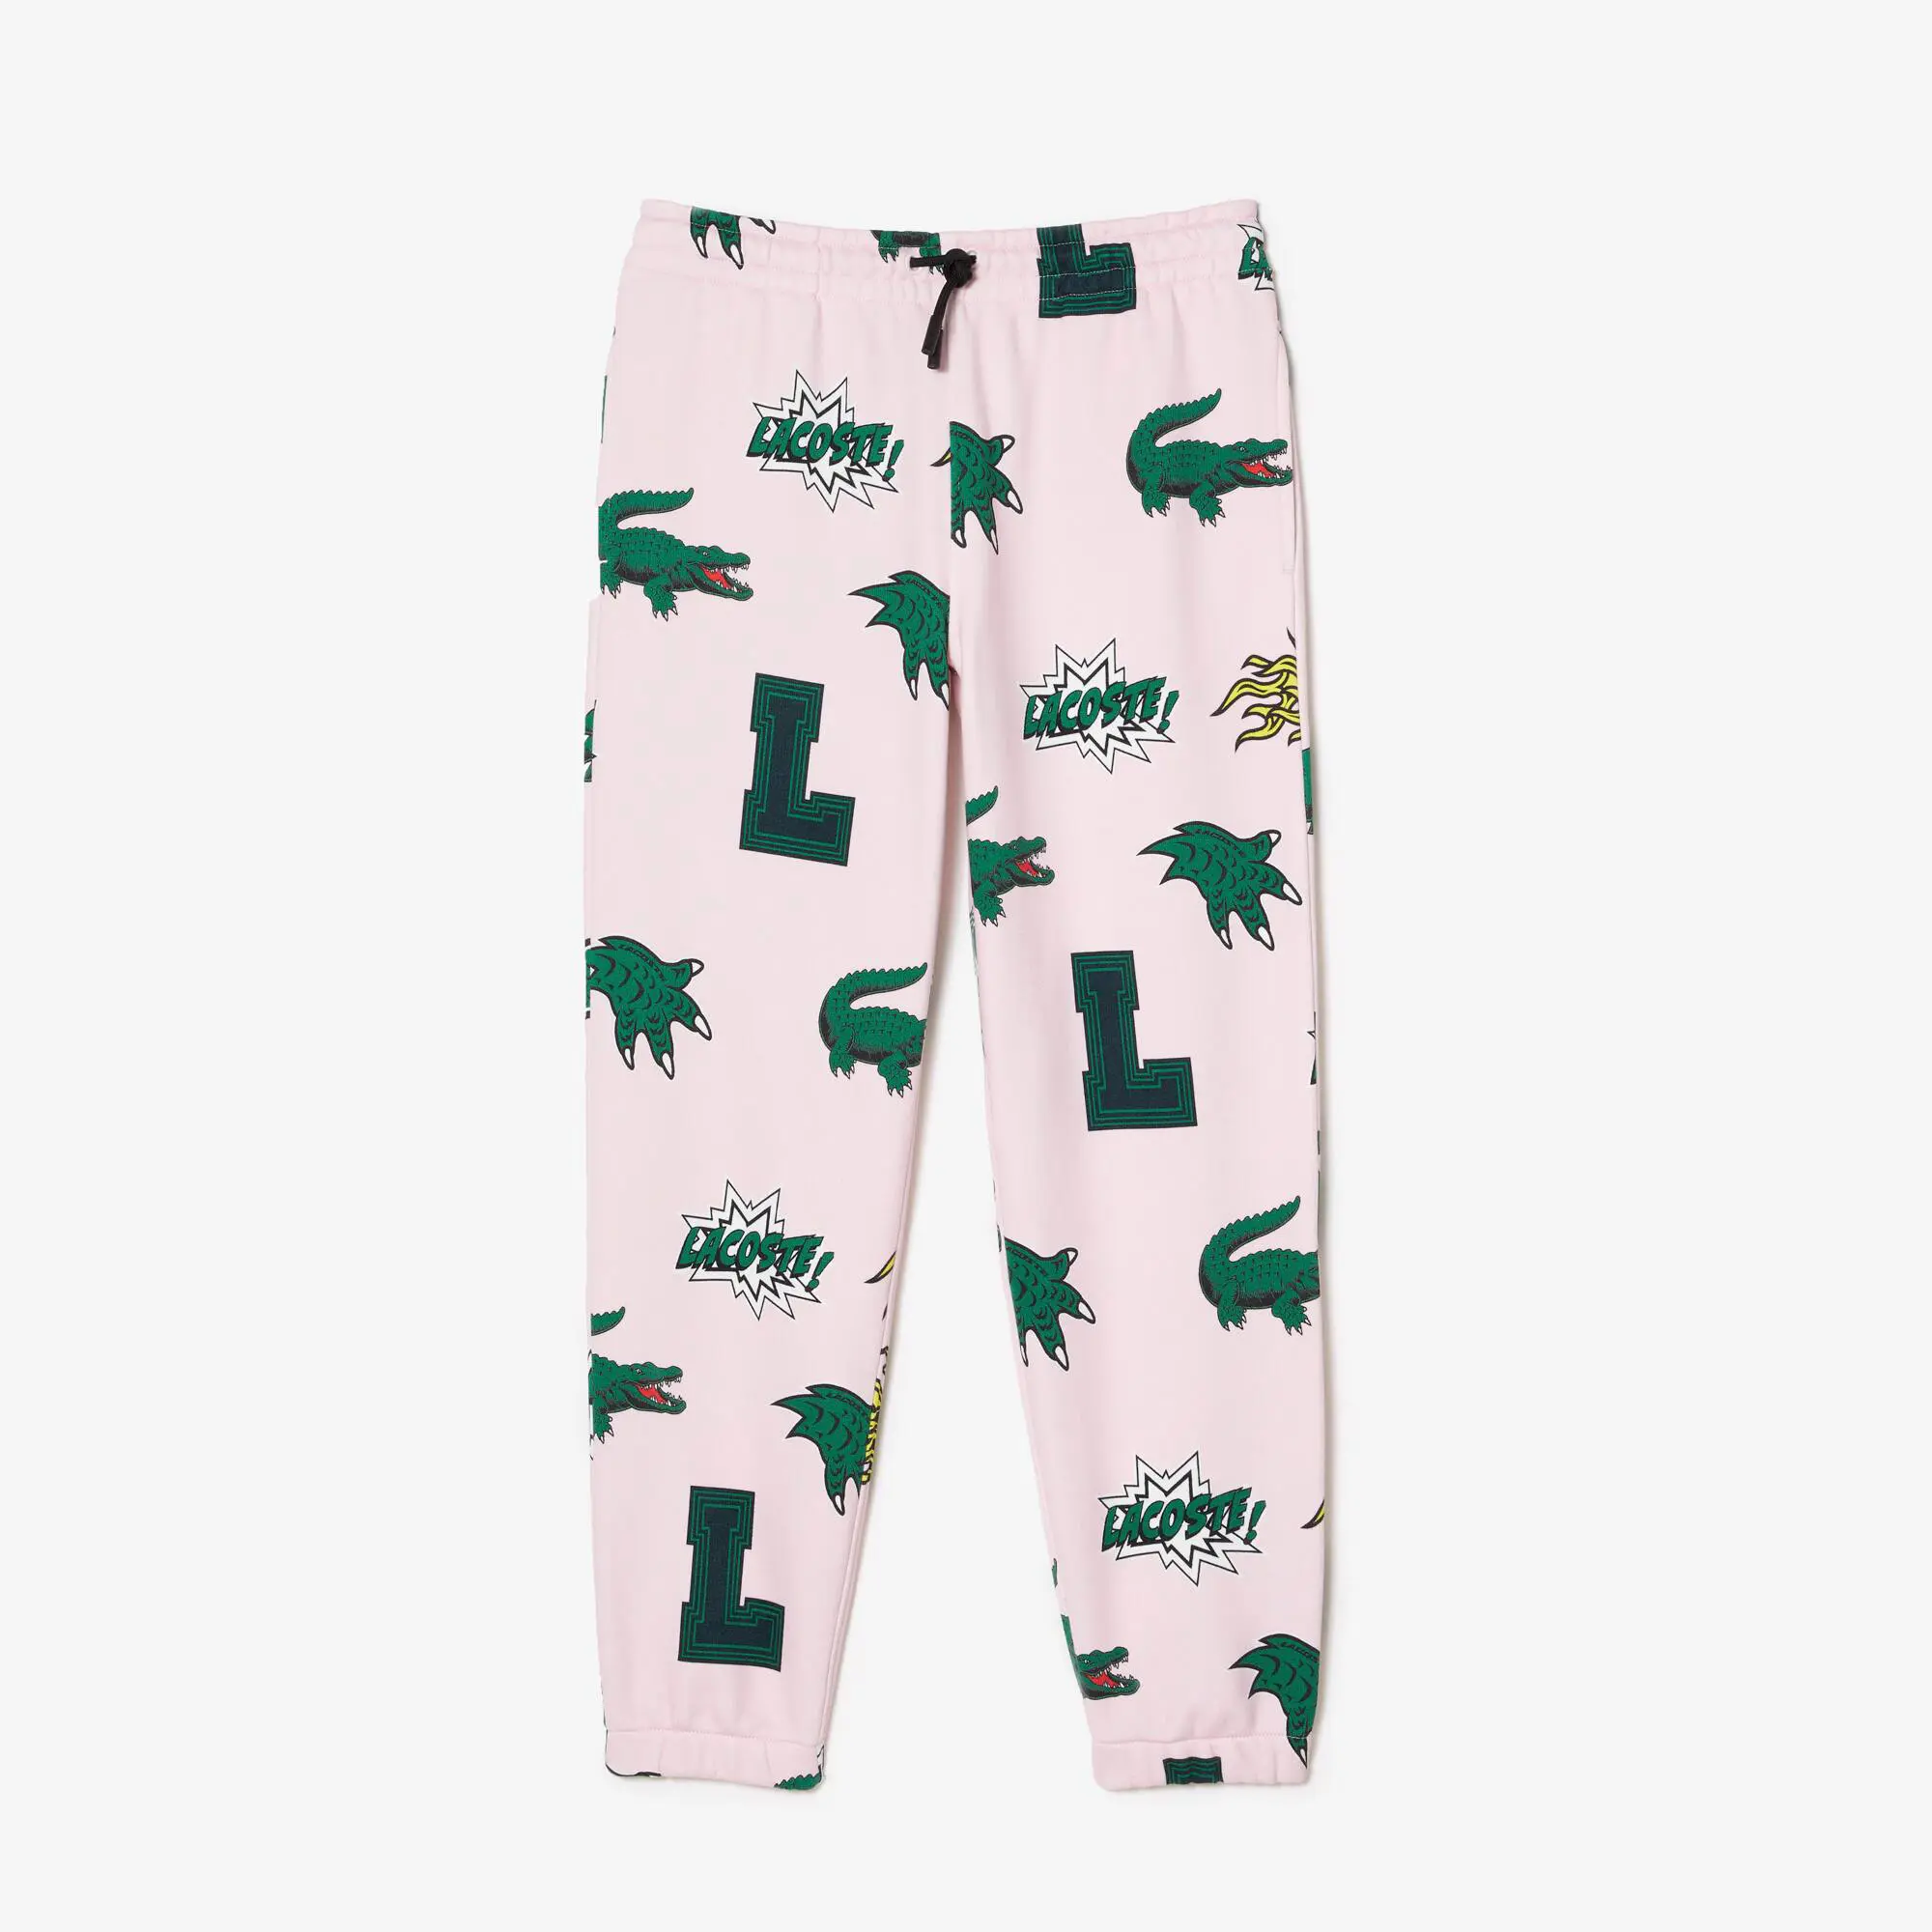 Lacoste Women's Lacoste Holiday Comic Print Trackpants. 2